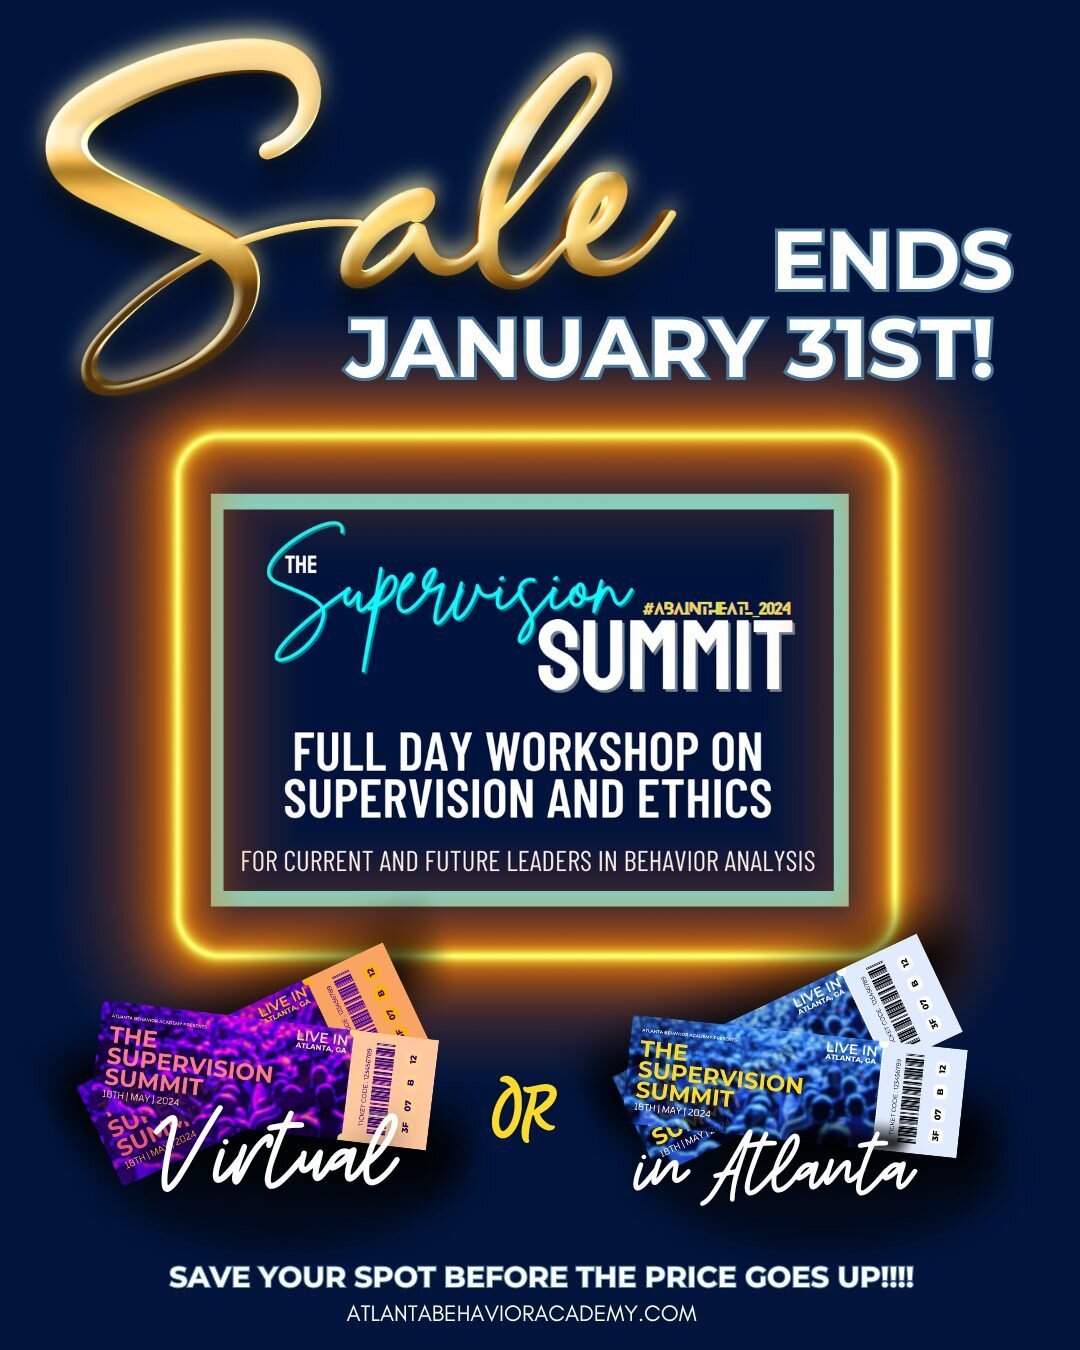 &quot;Time is running out! 🏃&zwj;♂️ Secure your early bird tickets for the Supervision Summit before the deal disappears on 1/31. Elevate your leadership skills with us! 🚀 Sign up now at atlantabehavioracademy.com ⁠
⁠
#EarlyBirdSpecial #Supervision